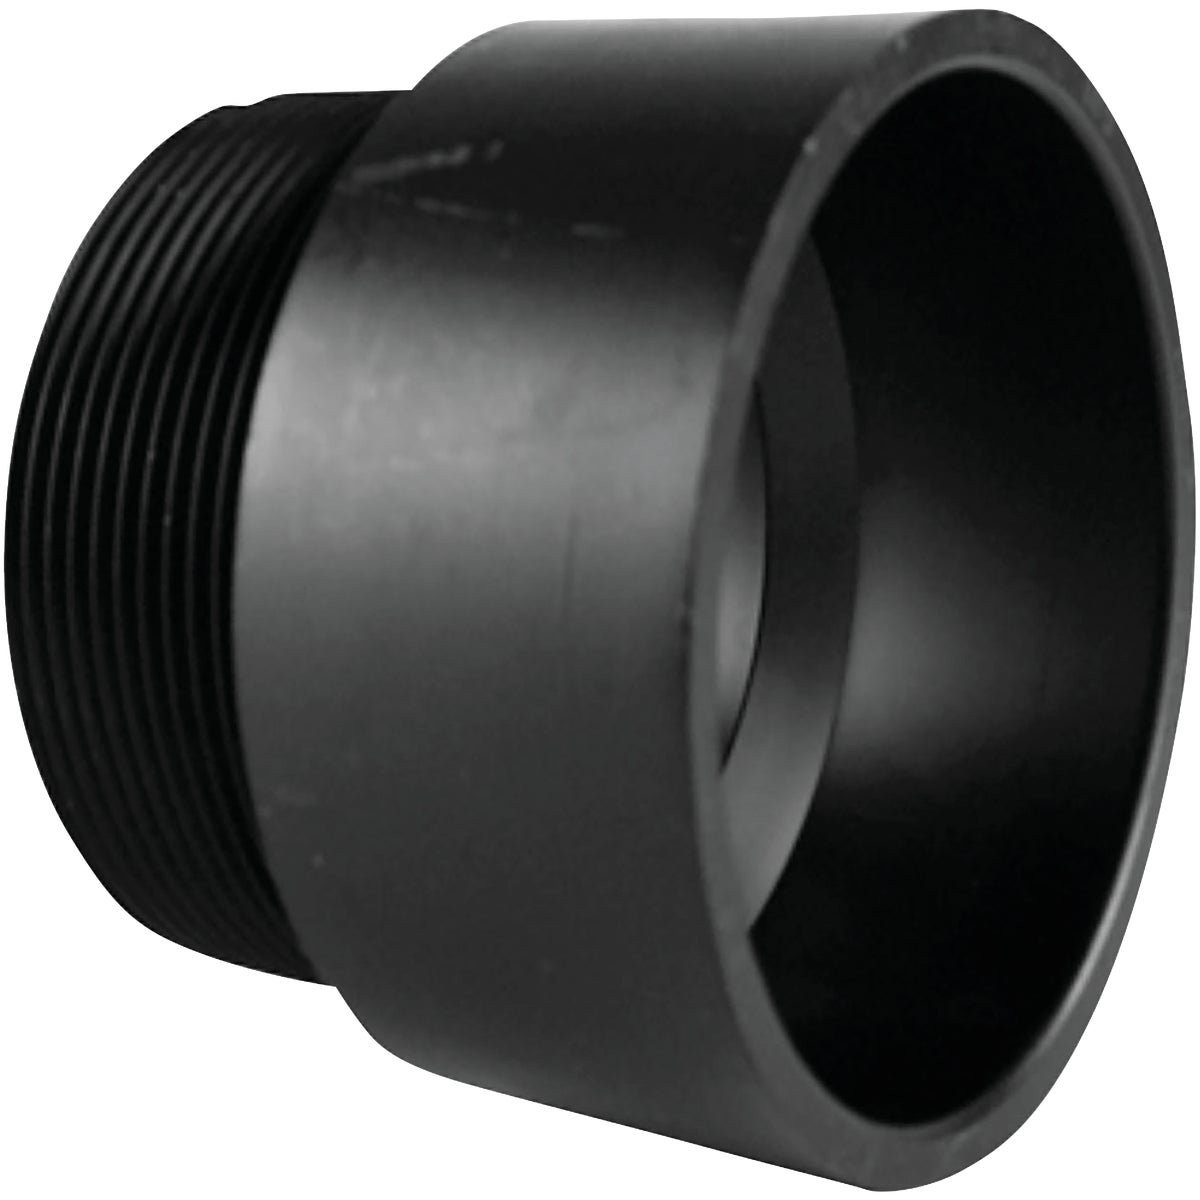 2″ ABS MALE ADAPTER